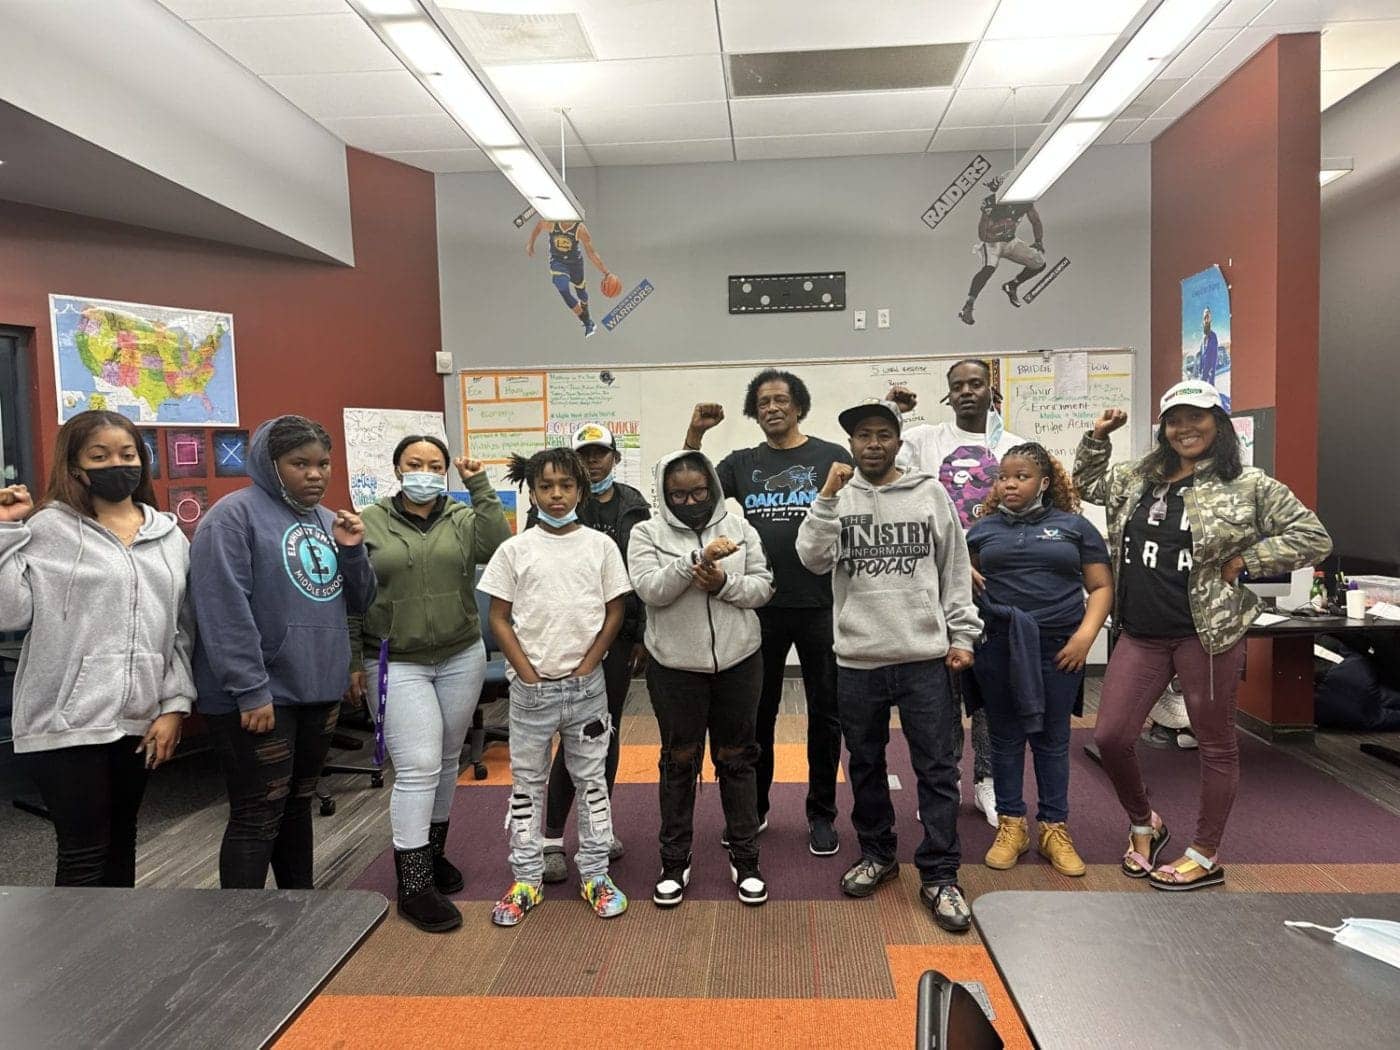 EOYDC-Weaponization-of-Media-class-with-JR-Valrey-1122-1400x1050, <strong>In East Oakland, JR Valrey teaches youth to use media against the system</strong>, Culture Currents Local News & Views News & Views 